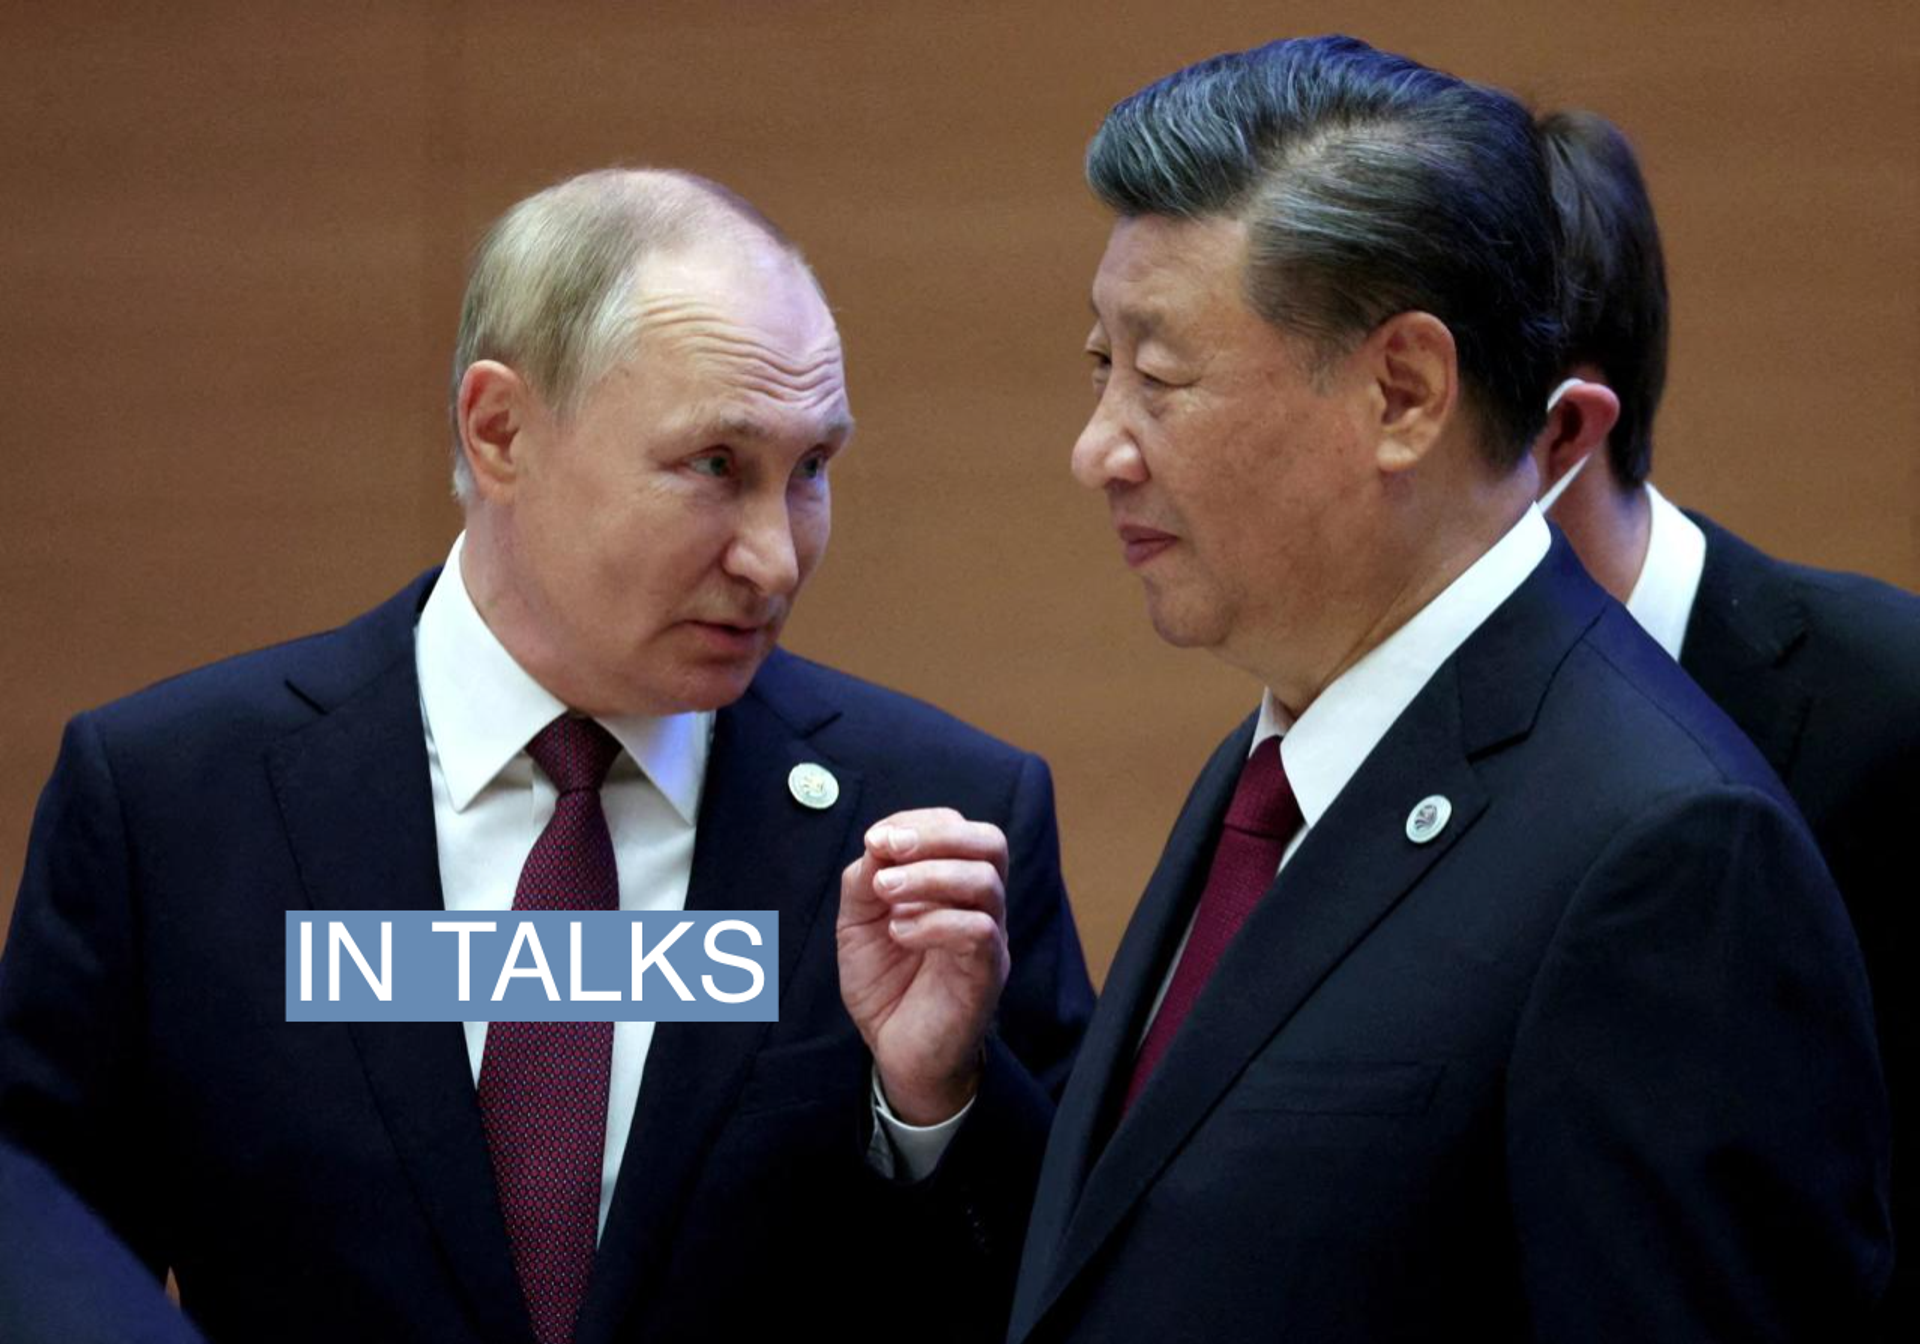 Russian President Vladimir Putin speaks with Chinese President Xi Jinping before an extended-format meeting of heads of the Shanghai Cooperation Organization summit (SCO) member states in Samarkand, Uzbekistan September 16, 2022. Sputnik/Sergey Bobylev/Pool via REUTERS